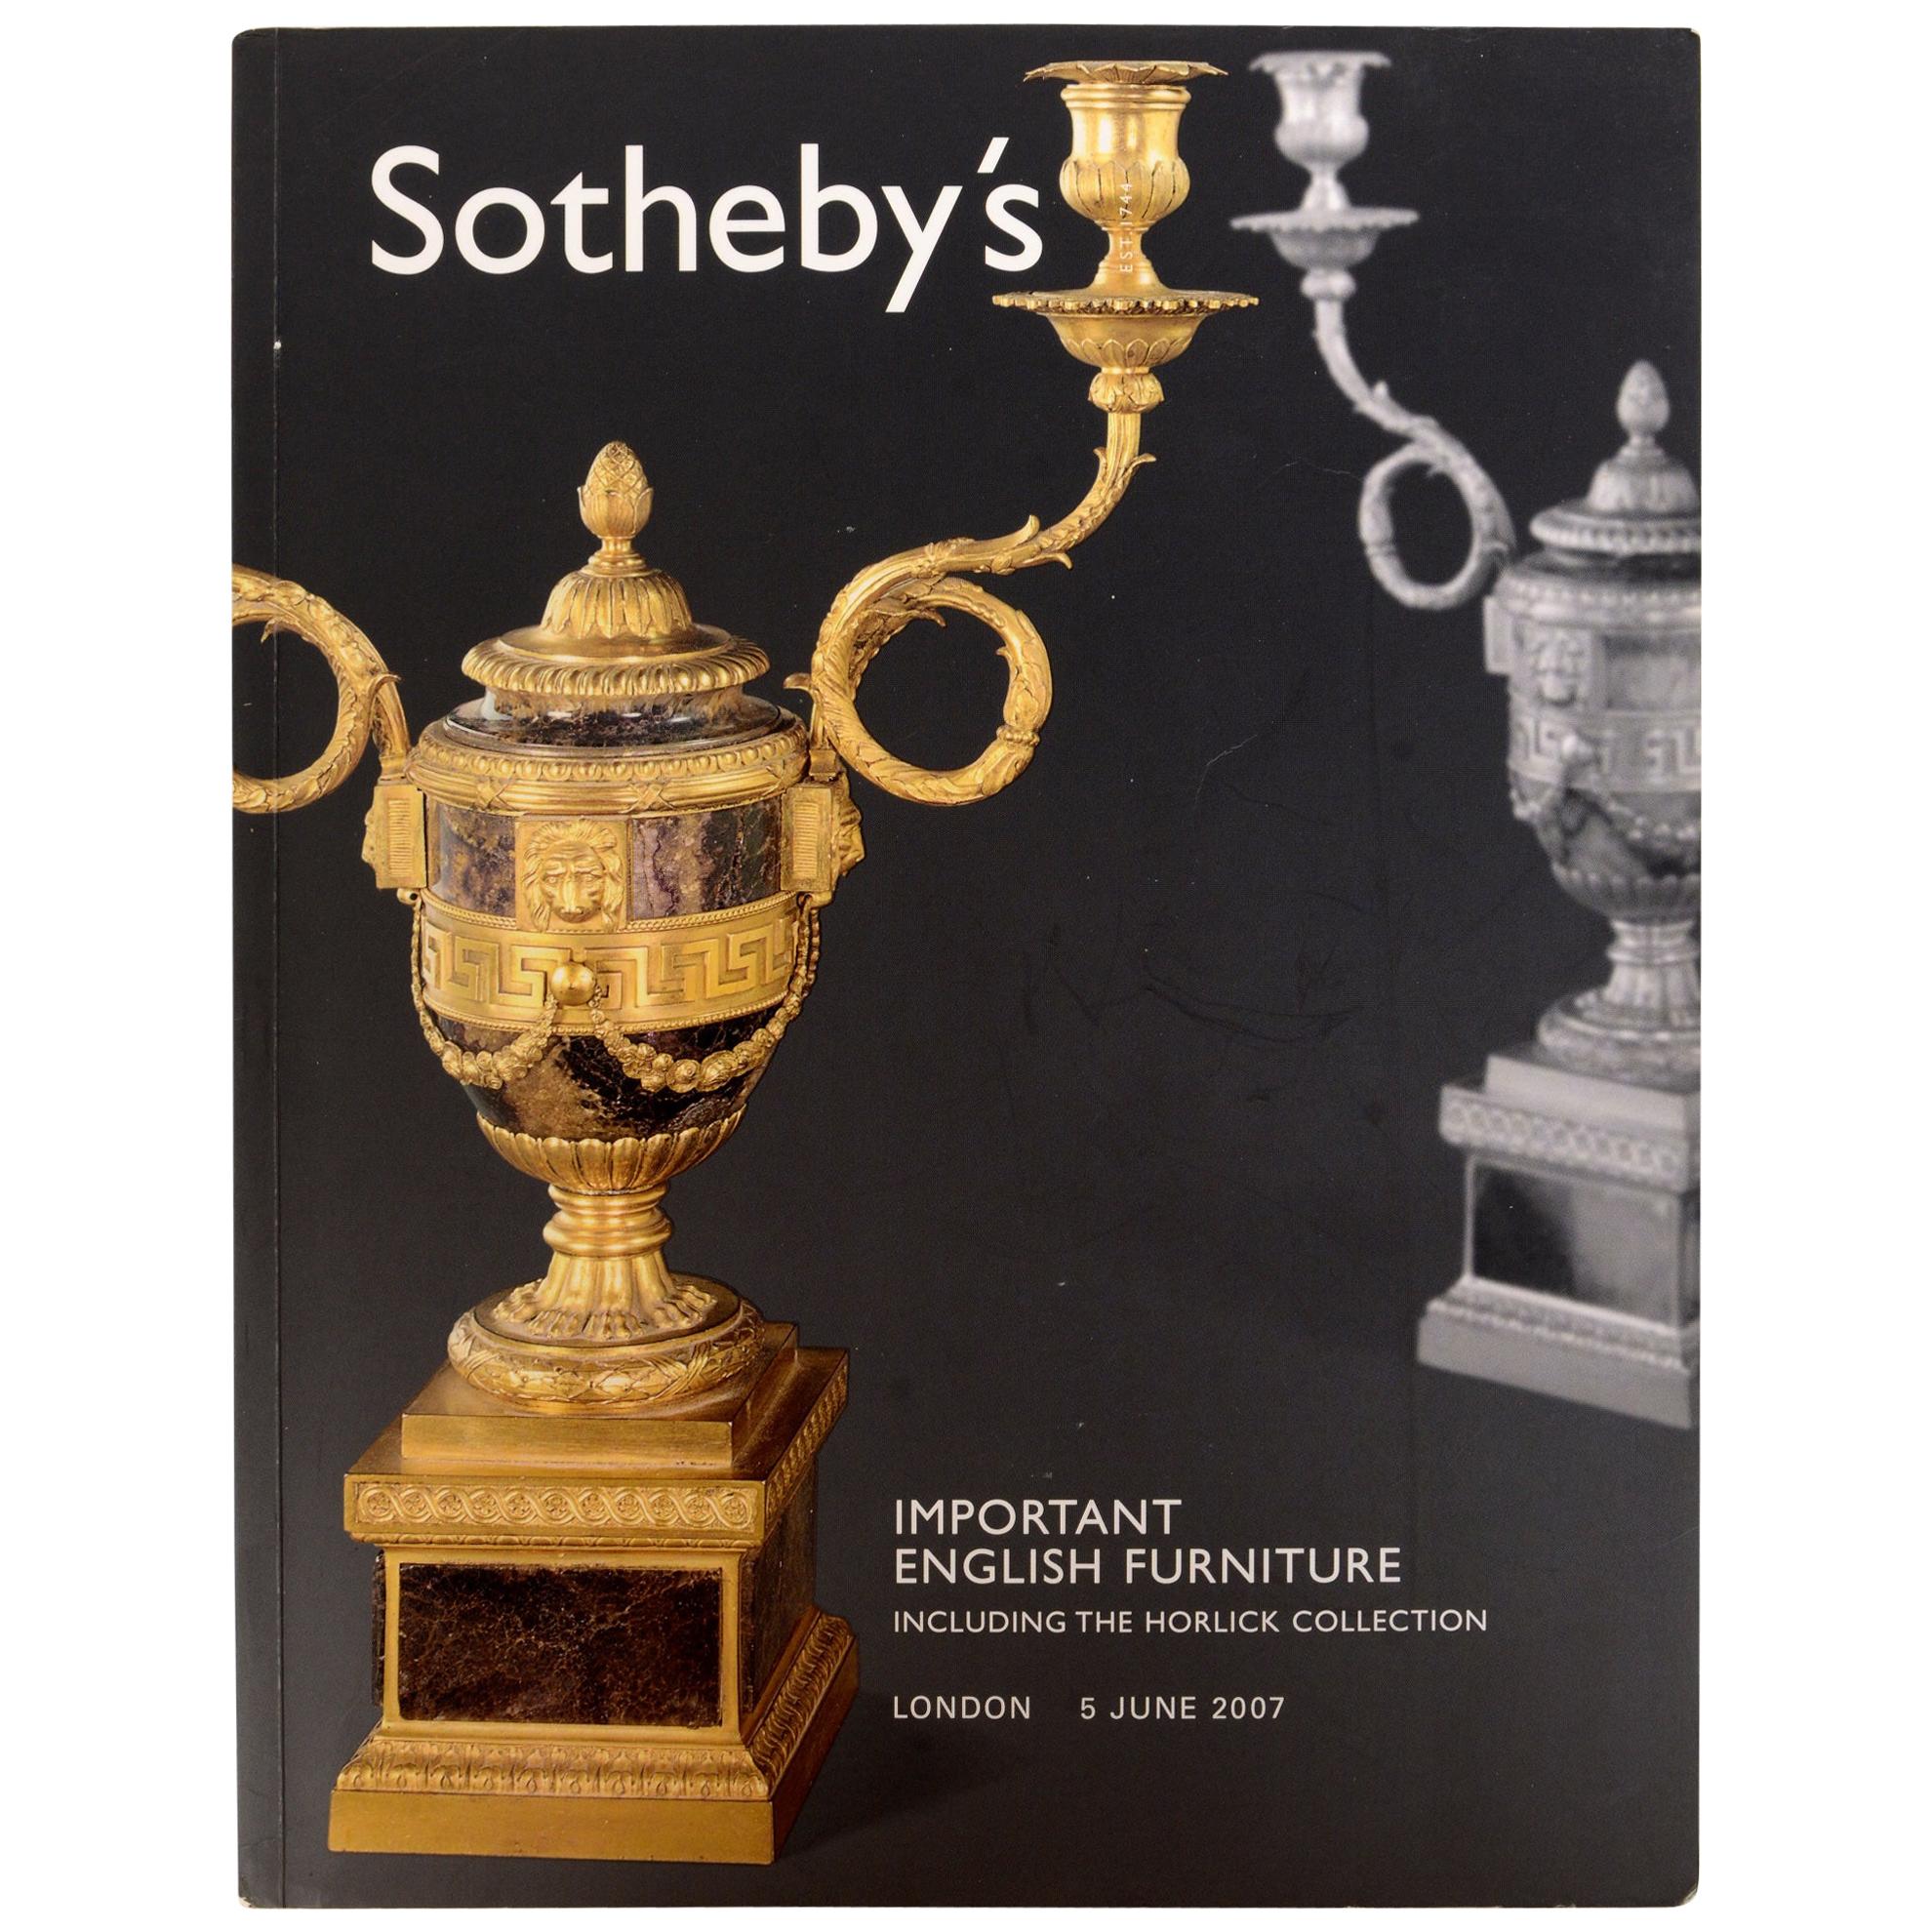 Sotheby's: Important English Furniture including the Horlick Collection